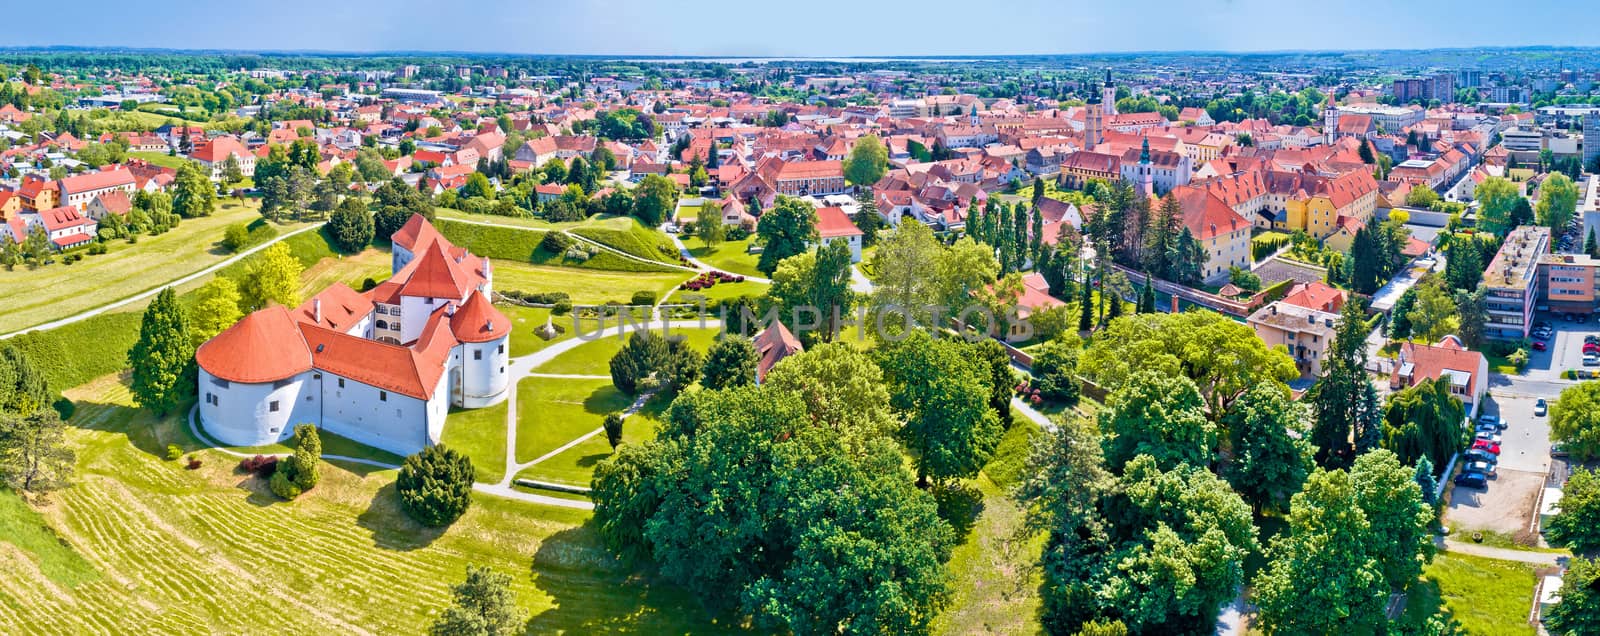 Historic town of Varazdin aerial panoramic view by xbrchx